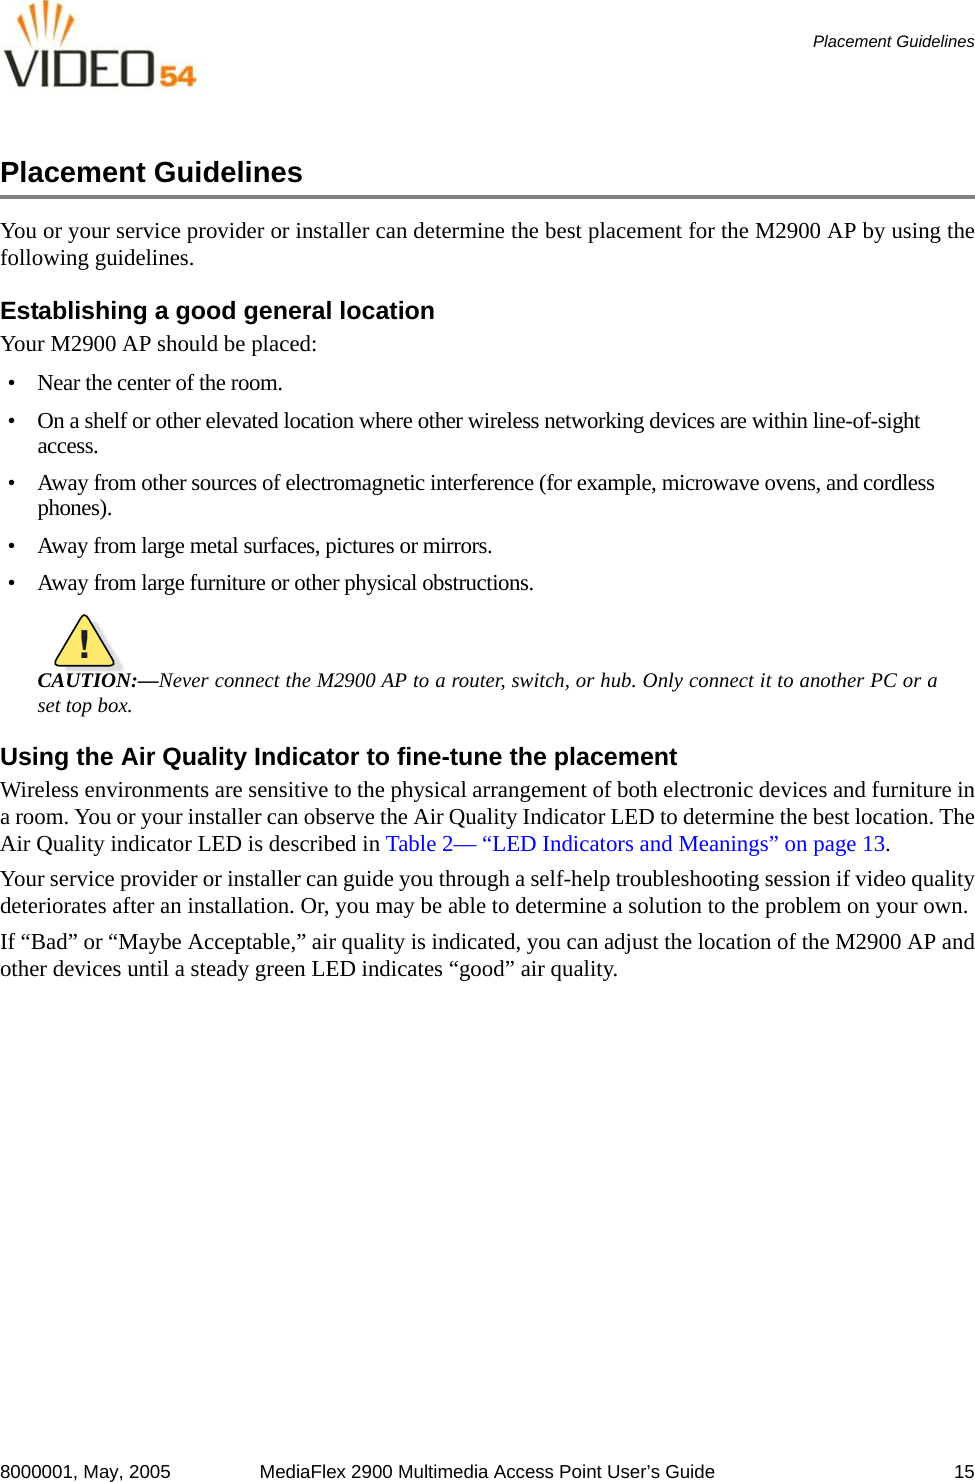 8000001, May, 2005 MediaFlex 2900 Multimedia Access Point User’s Guide 15Placement GuidelinesPlacement GuidelinesYou or your service provider or installer can determine the best placement for the M2900 AP by using thefollowing guidelines. Establishing a good general location Your M2900 AP should be placed:• Near the center of the room.• On a shelf or other elevated location where other wireless networking devices are within line-of-sight access.• Away from other sources of electromagnetic interference (for example, microwave ovens, and cordless phones).• Away from large metal surfaces, pictures or mirrors.• Away from large furniture or other physical obstructions.!CAUTION:—Never connect the M2900 AP to a router, switch, or hub. Only connect it to another PC or aset top box.Using the Air Quality Indicator to fine-tune the placementWireless environments are sensitive to the physical arrangement of both electronic devices and furniture ina room. You or your installer can observe the Air Quality Indicator LED to determine the best location. TheAir Quality indicator LED is described in Table 2— “LED Indicators and Meanings” on page 13.Your service provider or installer can guide you through a self-help troubleshooting session if video qualitydeteriorates after an installation. Or, you may be able to determine a solution to the problem on your own. If “Bad” or “Maybe Acceptable,” air quality is indicated, you can adjust the location of the M2900 AP andother devices until a steady green LED indicates “good” air quality.